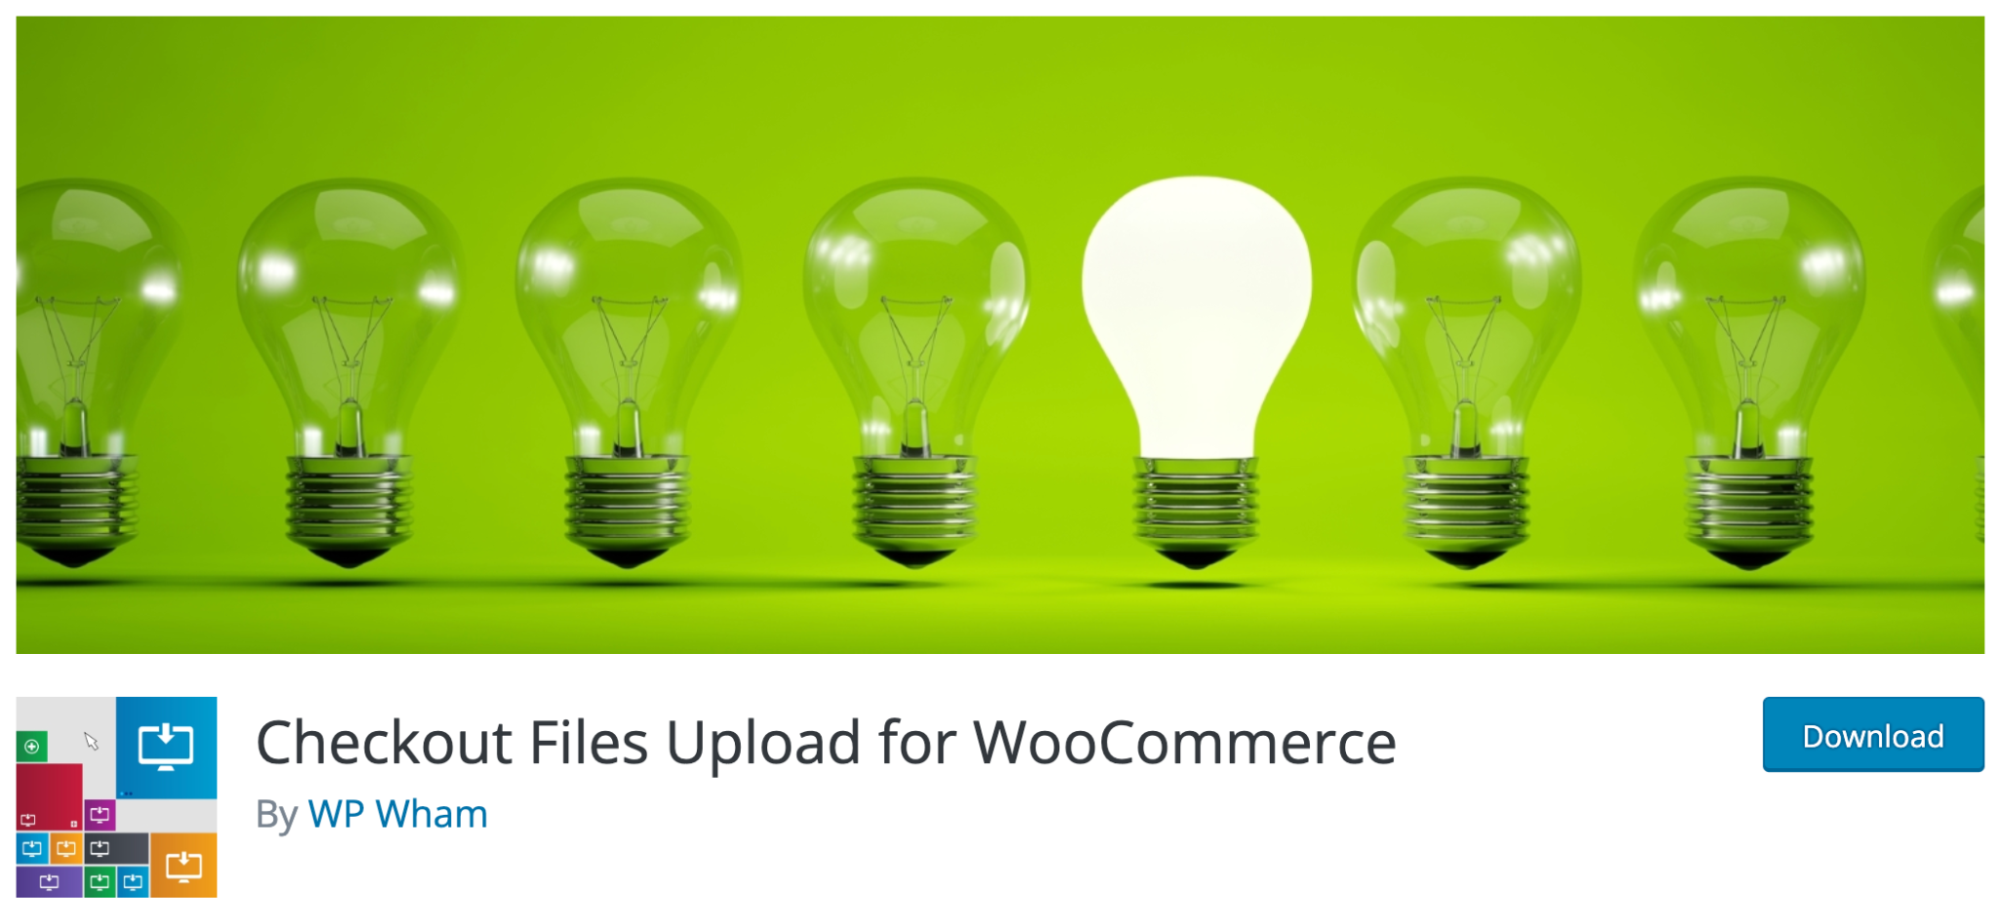 3 Checkout Files Upload For Woocommerce